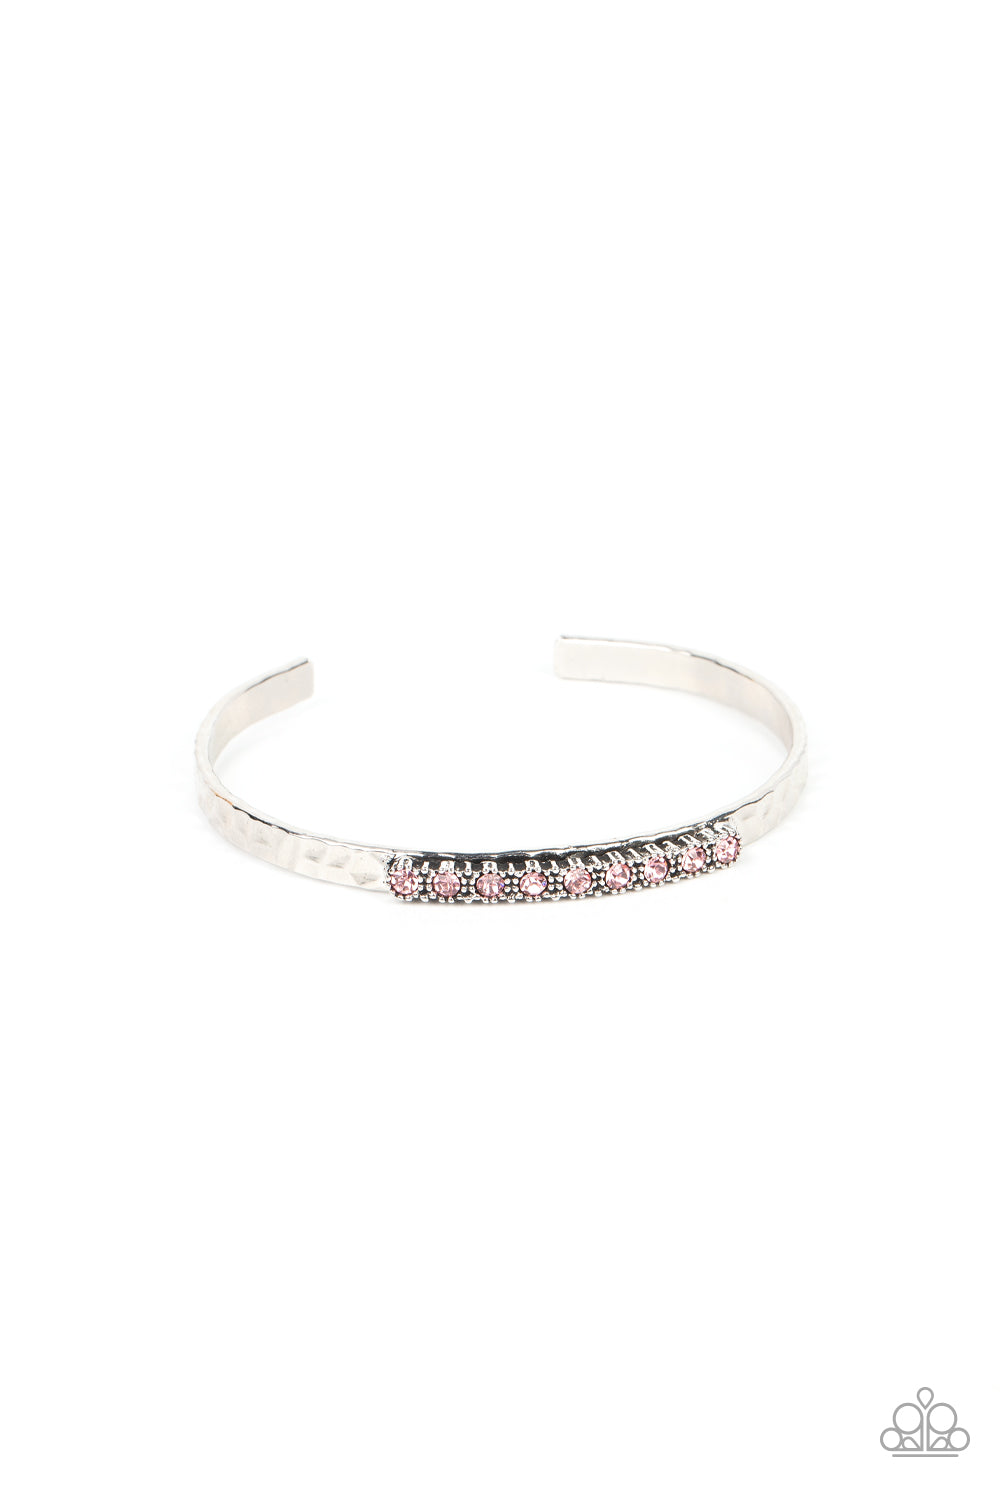 Gives Me the SHIMMERS - pink - Paparazzi bracelet